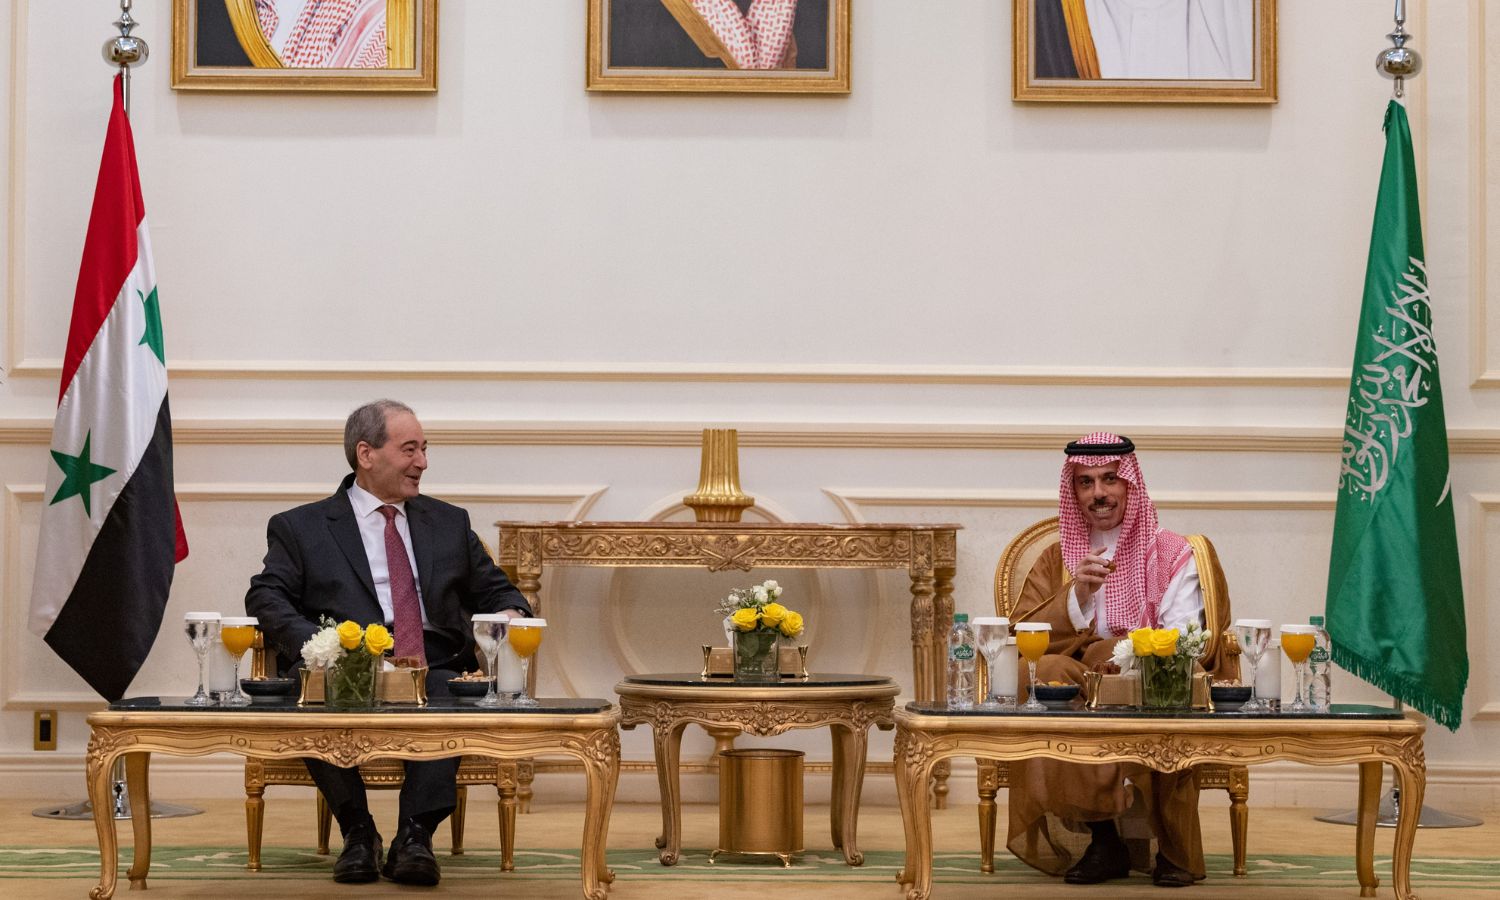 Syrian Foreign Minister Faisal Mekdad, on his first visit to Saudi Arabia since 2011- April 12, 2023 (SPA)